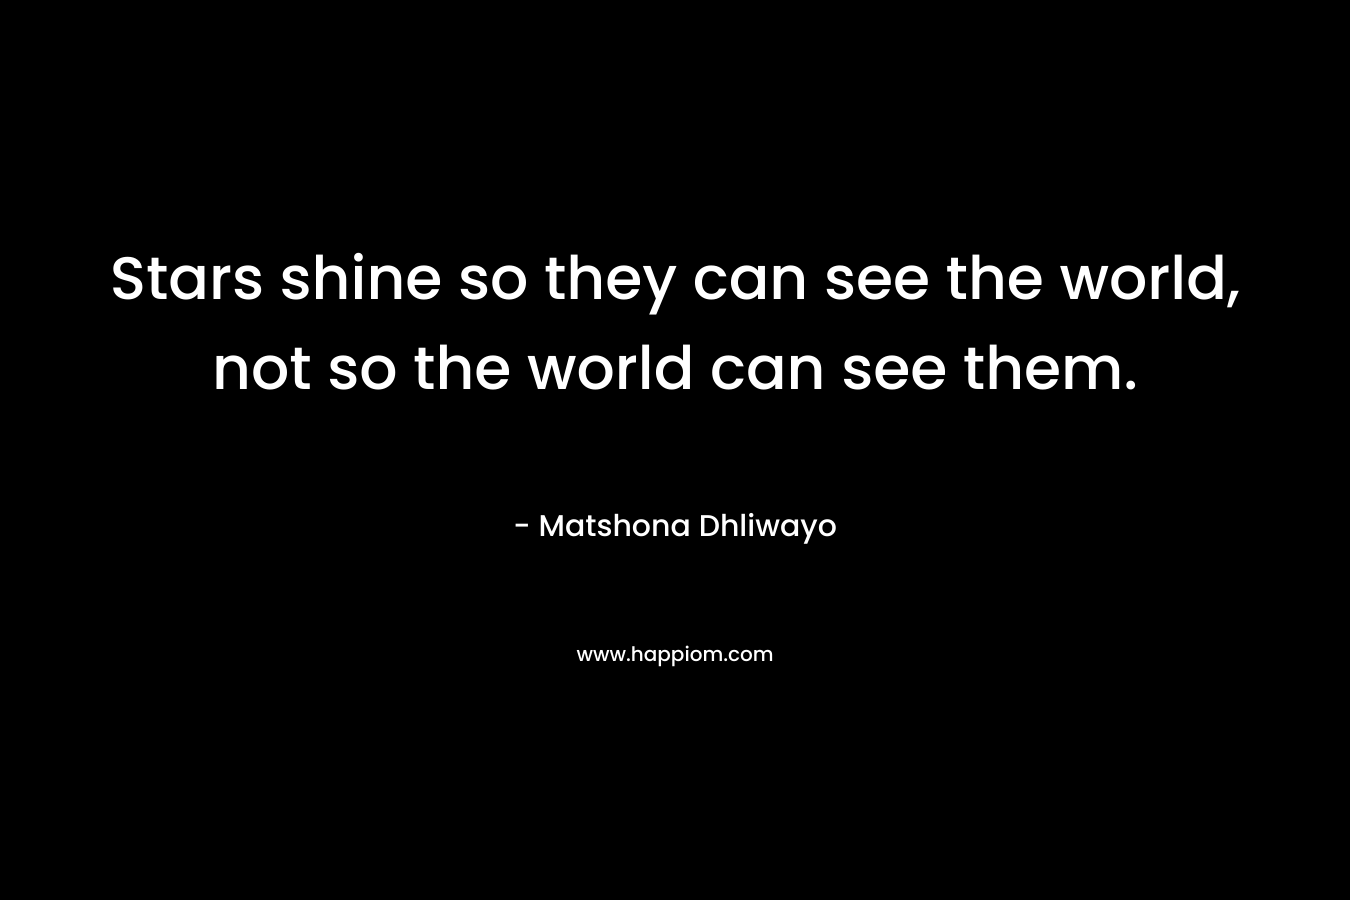 Stars shine so they can see the world, not so the world can see them.